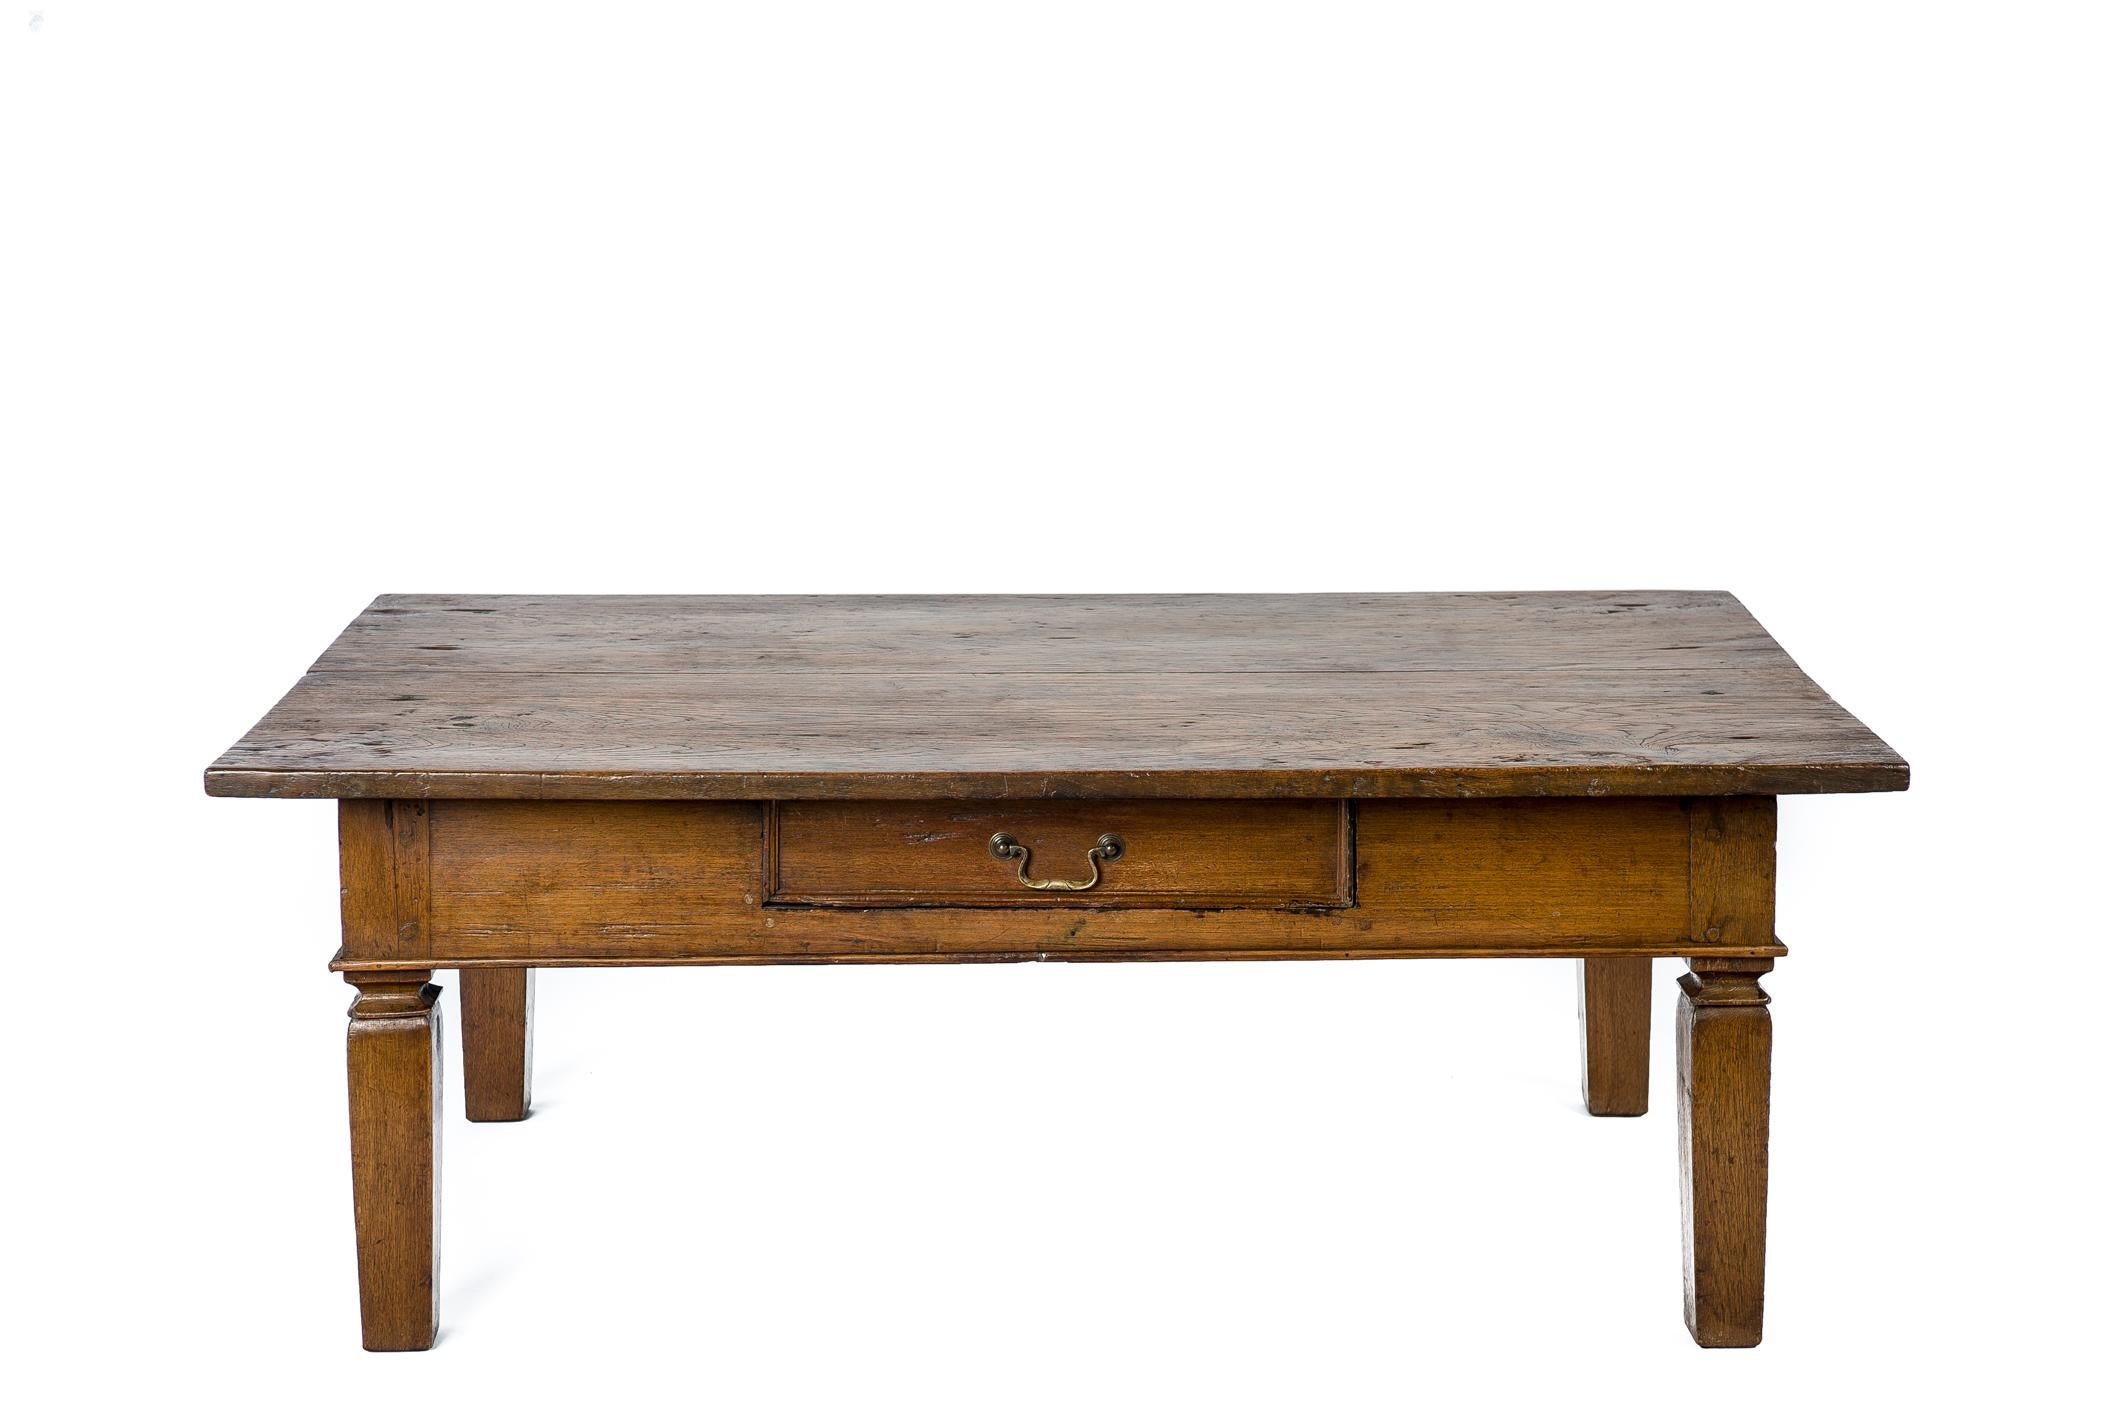 This elegant coffee table was made in the Netherlands in the late 19th century. It has a tabletop made from two wide boards of a solid teak joint together by a lap joint. Below is a single drawer with a simple trim and a brass drawer pull. The table